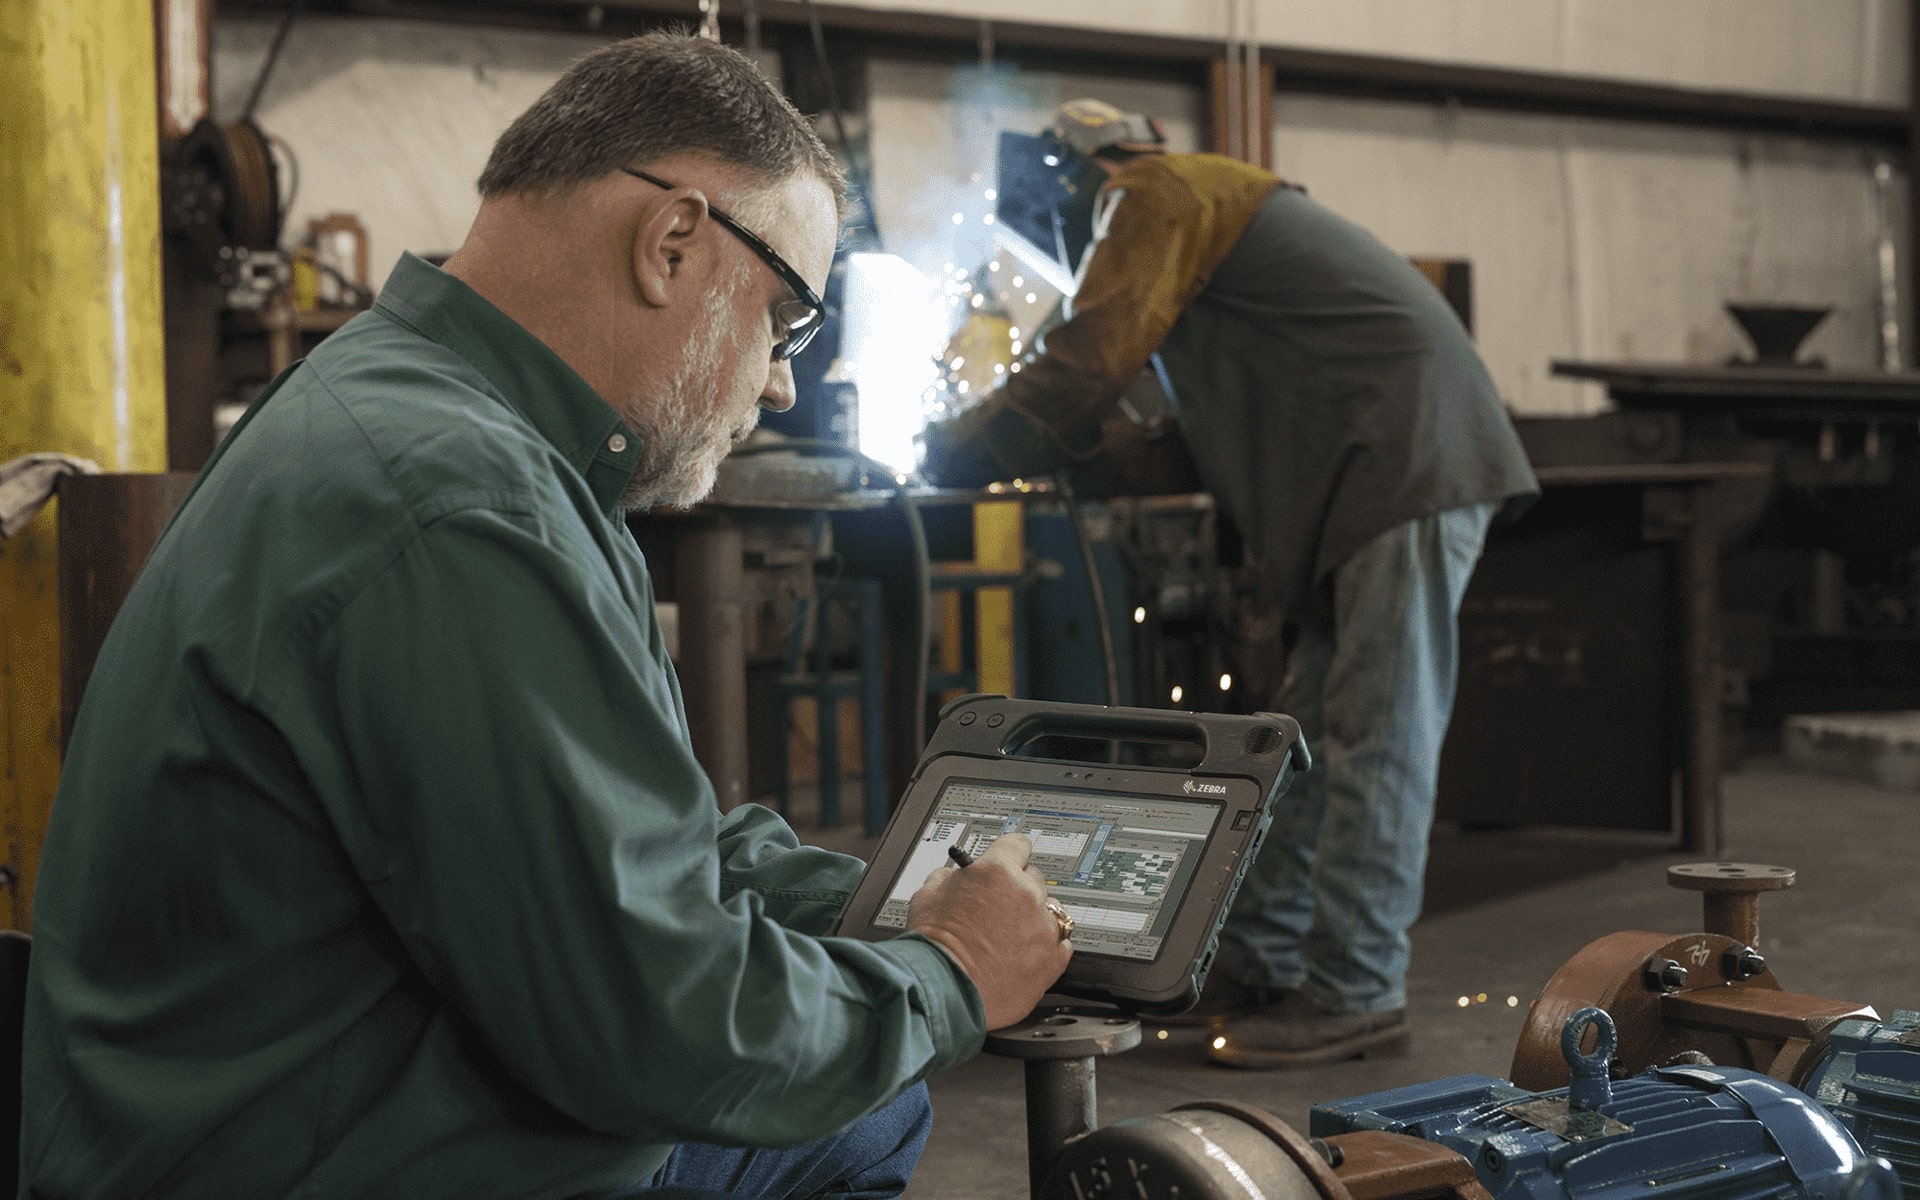 Client using MobileManage software on a tablet in a machine shop